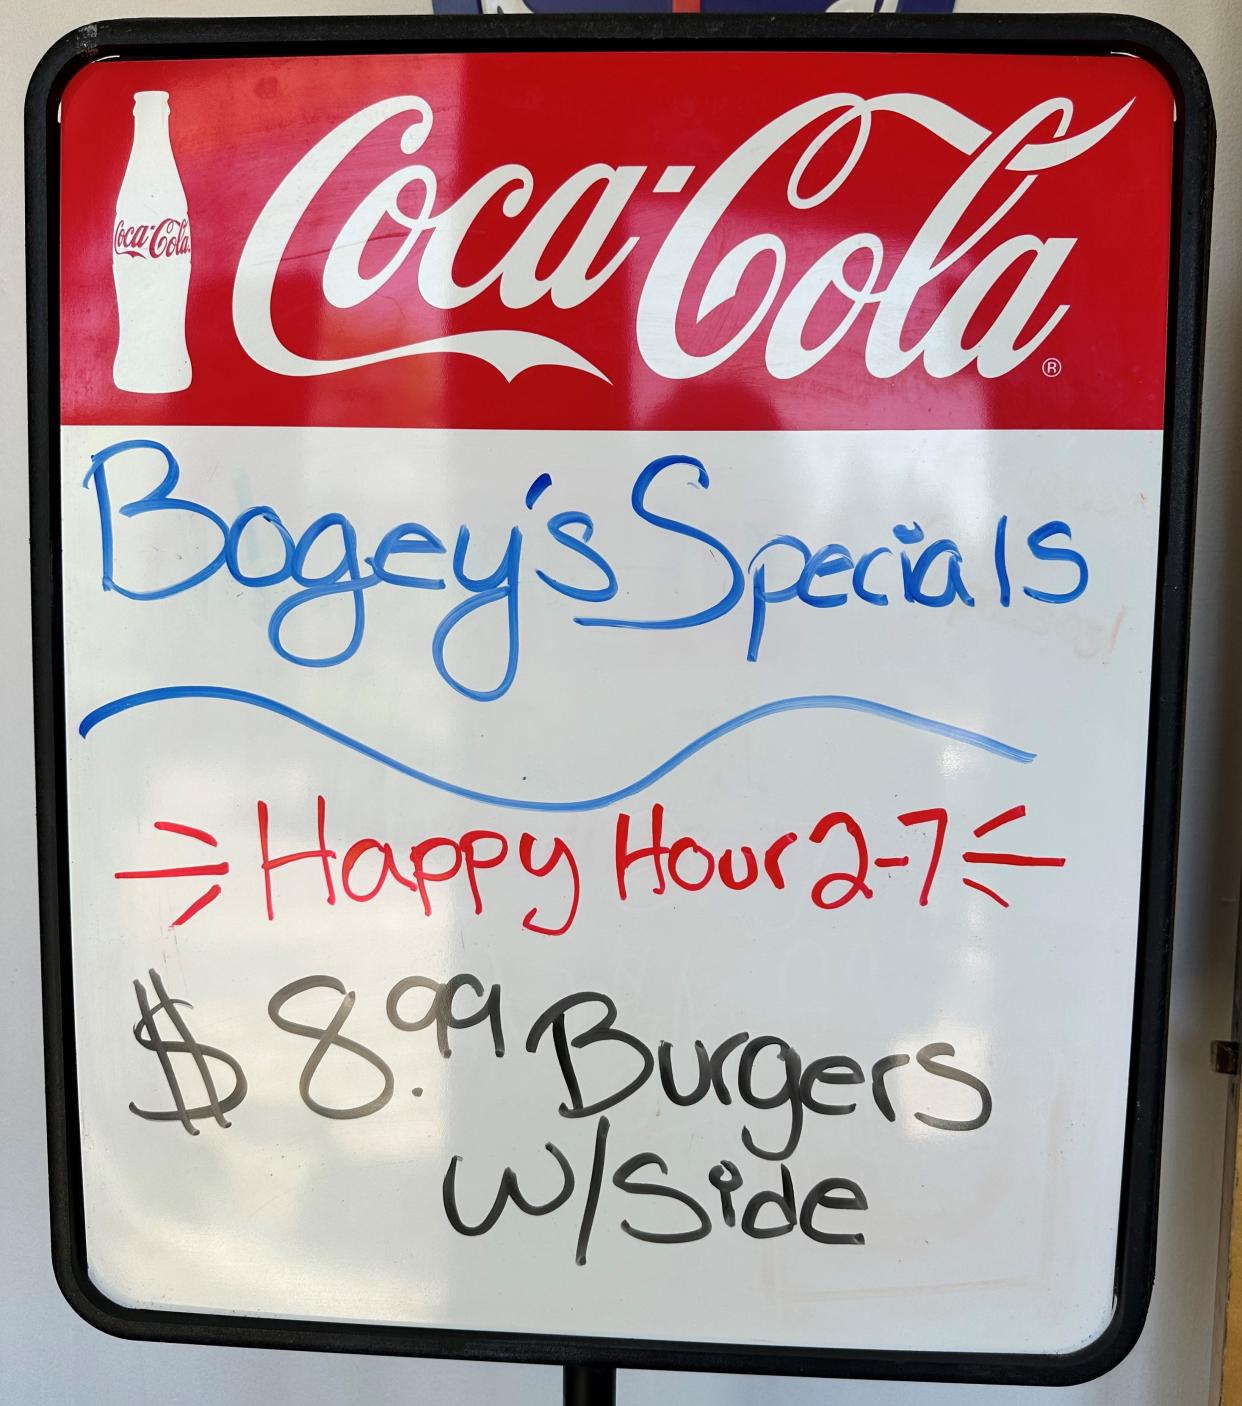 Happy hour specials change daily at Bogey's Pub & Grille at Meadowlake Golf & Swim in Plain Township.